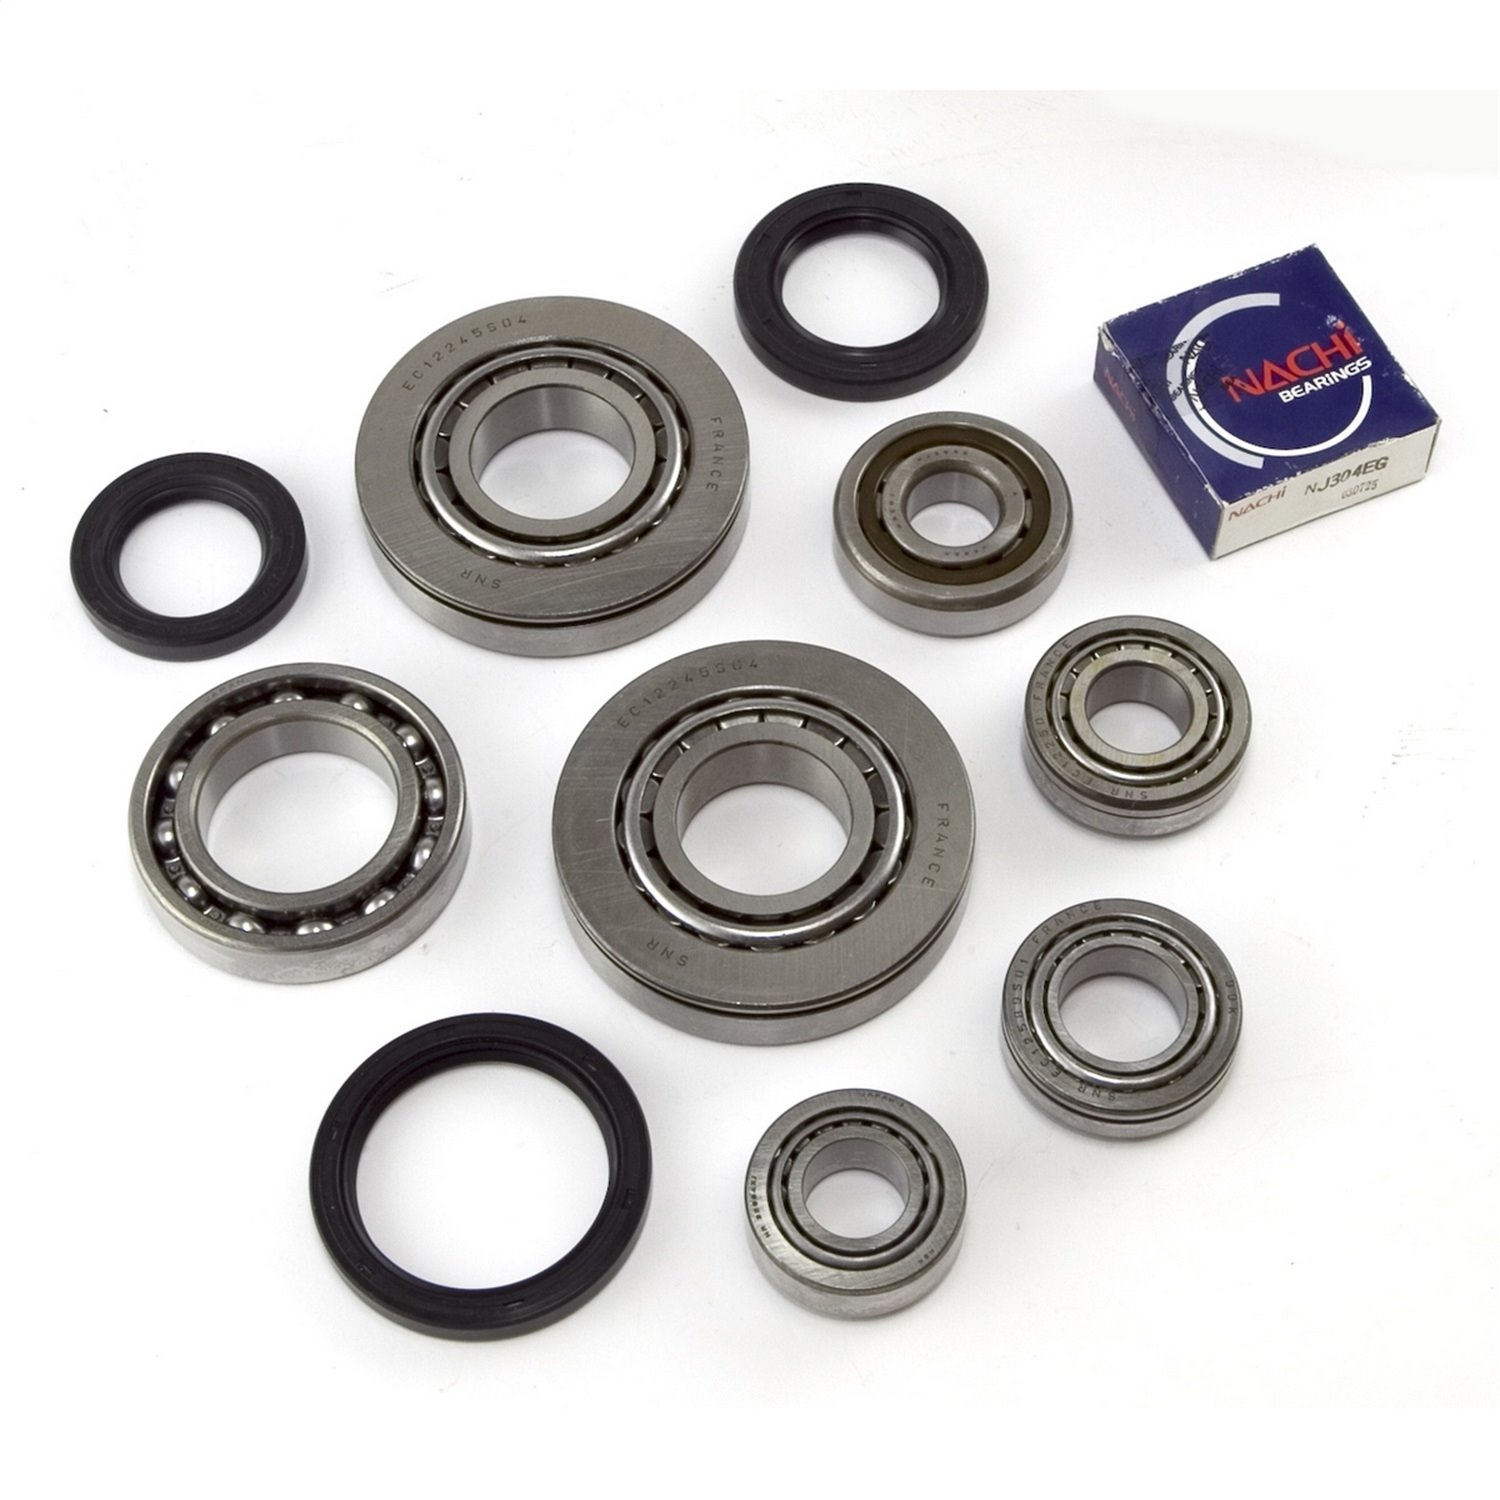 Replacement bearing kit for Peugeot BA10/5 manual transmission from Omix-ADA